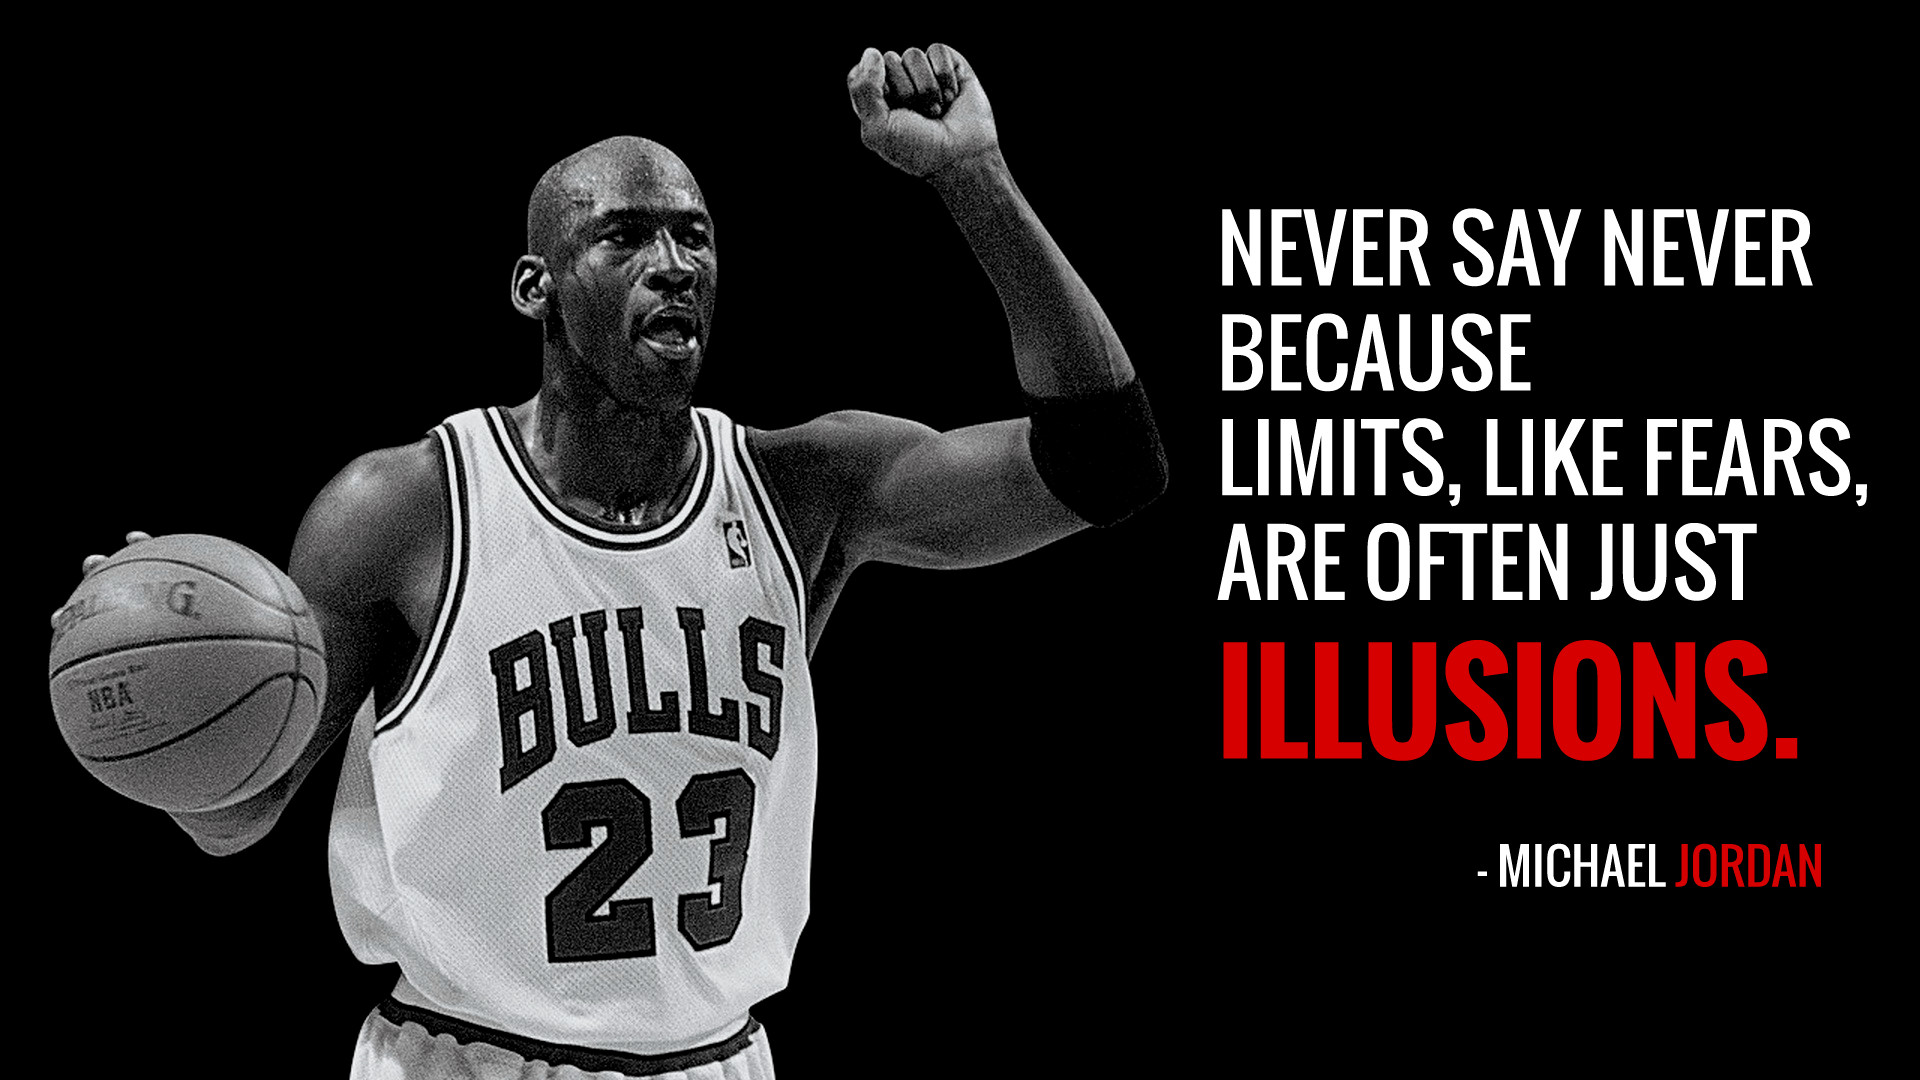 Sports Quotes Motivational
 25 All Time Best Inspirational Sports Quotes To Get You Going